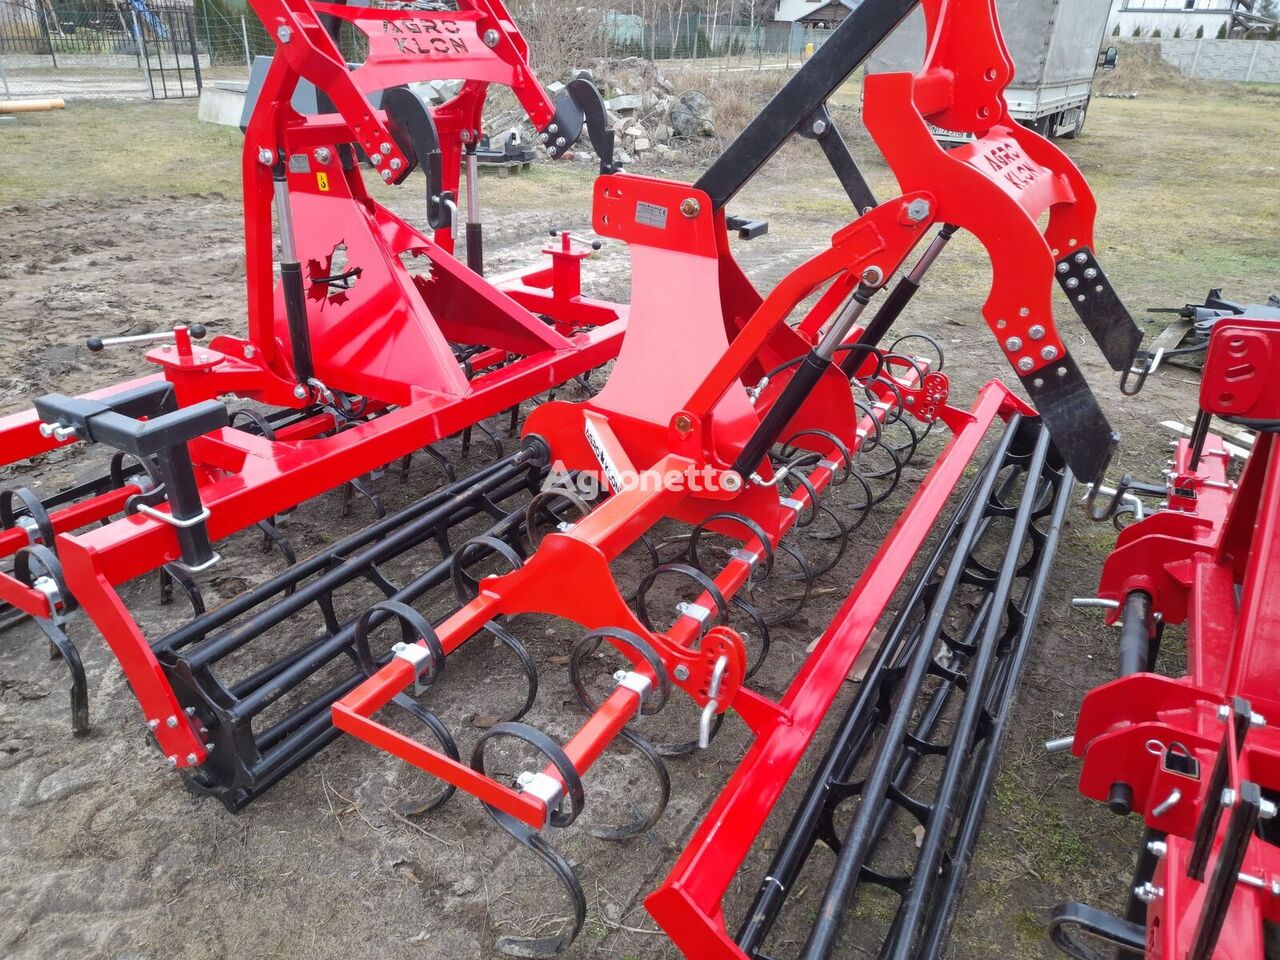 new Seeding cultivator with hydropack / Sägrubber mit Hydropack seedbed cultivator